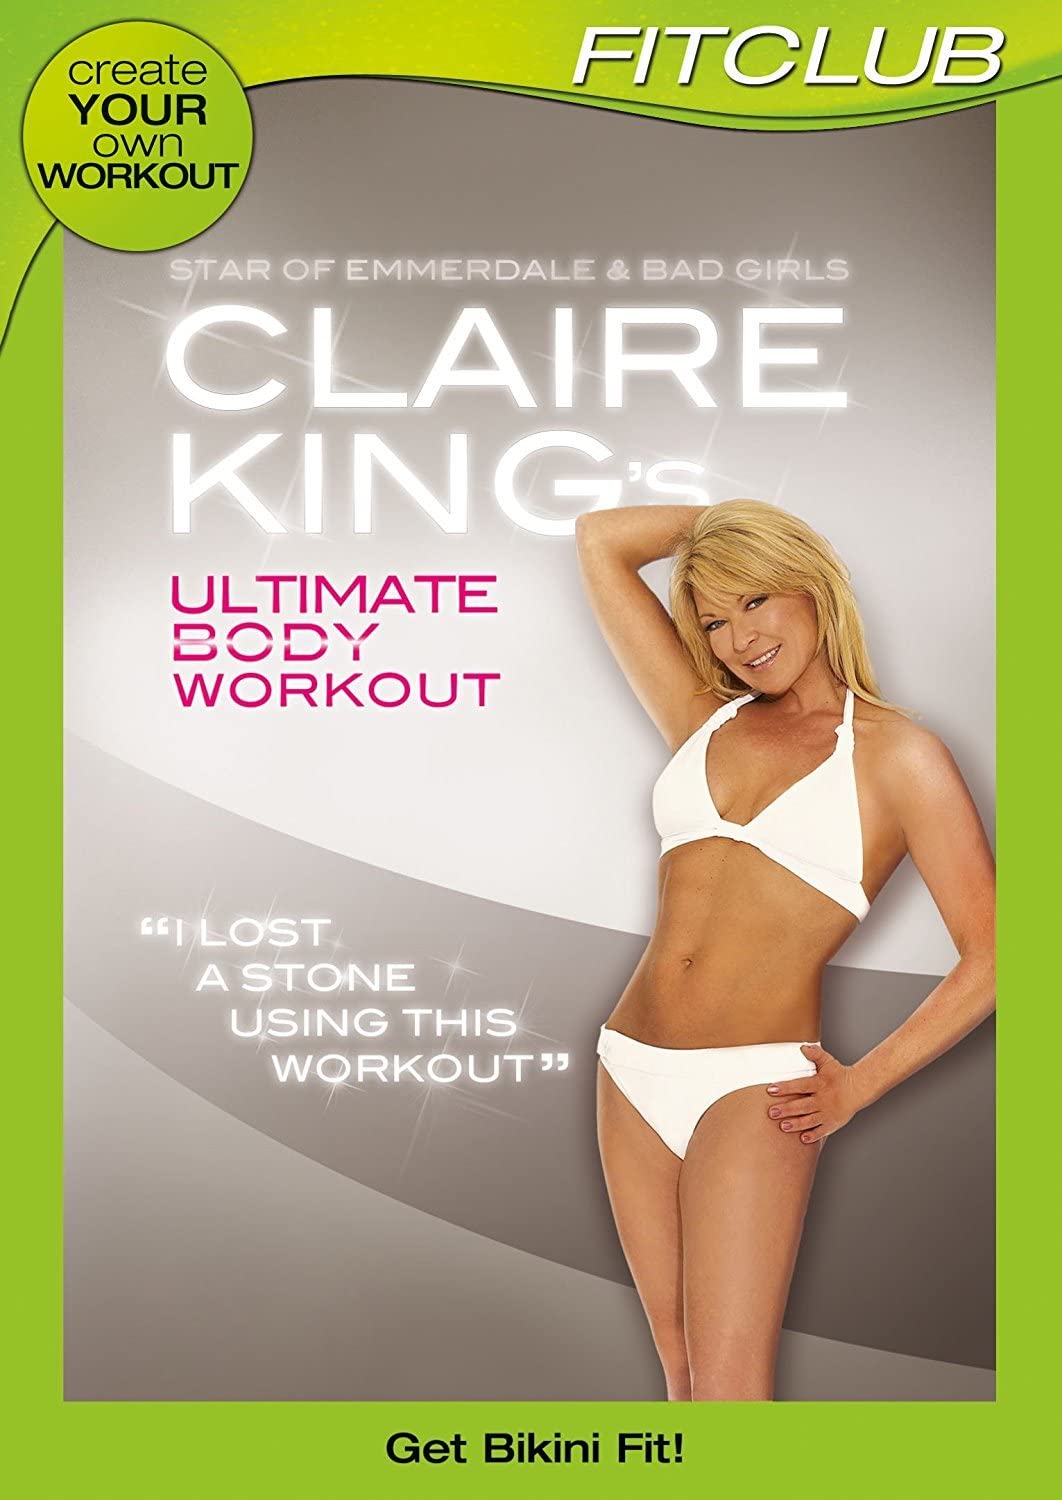 Claire King’s Ultimate Bikini Body Workout - Fitness [DVD]